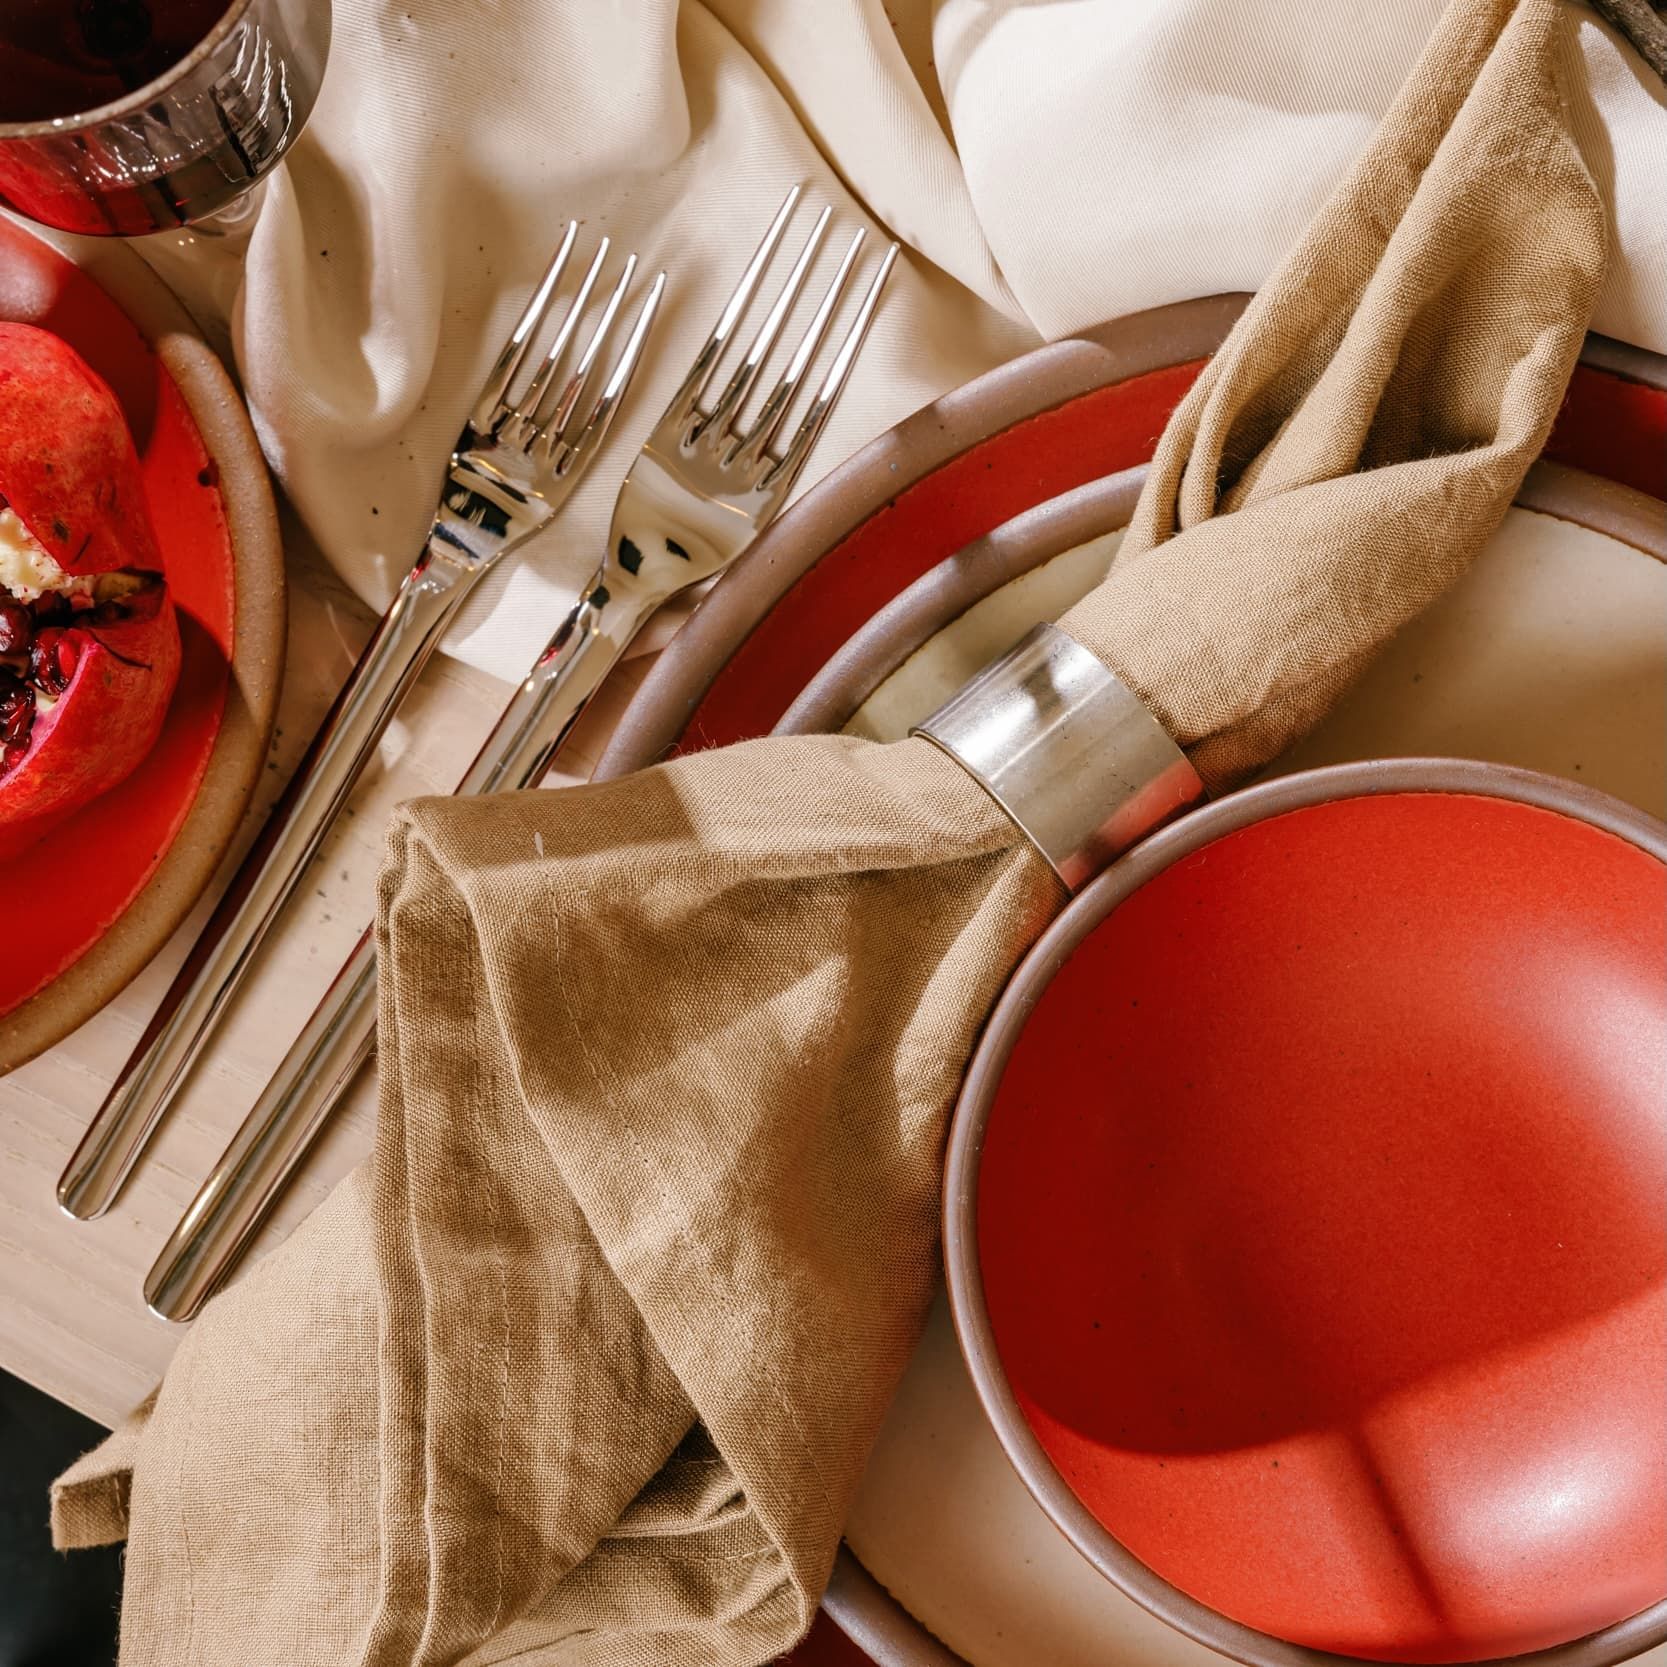 A shiny steel salad fork and dinner fork sit next to a place setting of ceramic dinnerware in cream and bold red colors. There's also a taupe dinner napkin tucked in a pewter napkin ring.